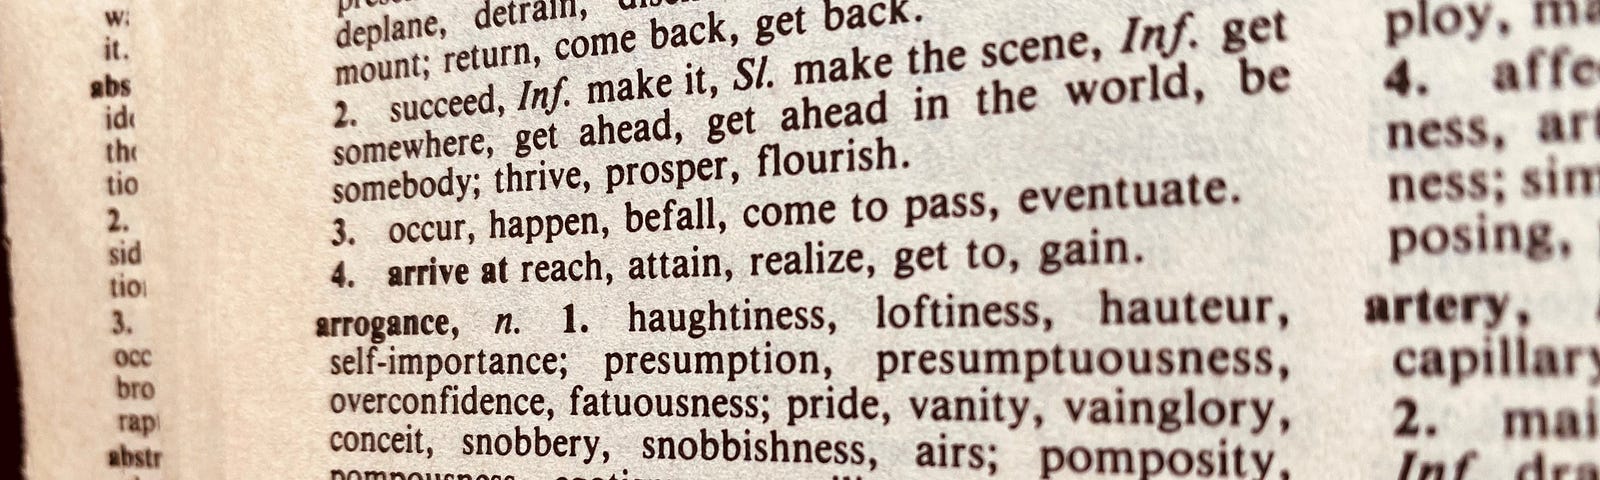 The image of a page from the A section of a thesaurus, focused on “arrogance.” Synonyms include: haughtiness, loftiness, self-importance, presumption, overconfidence, pride, vanity, vainglory, conceit, snobbishness, etc.